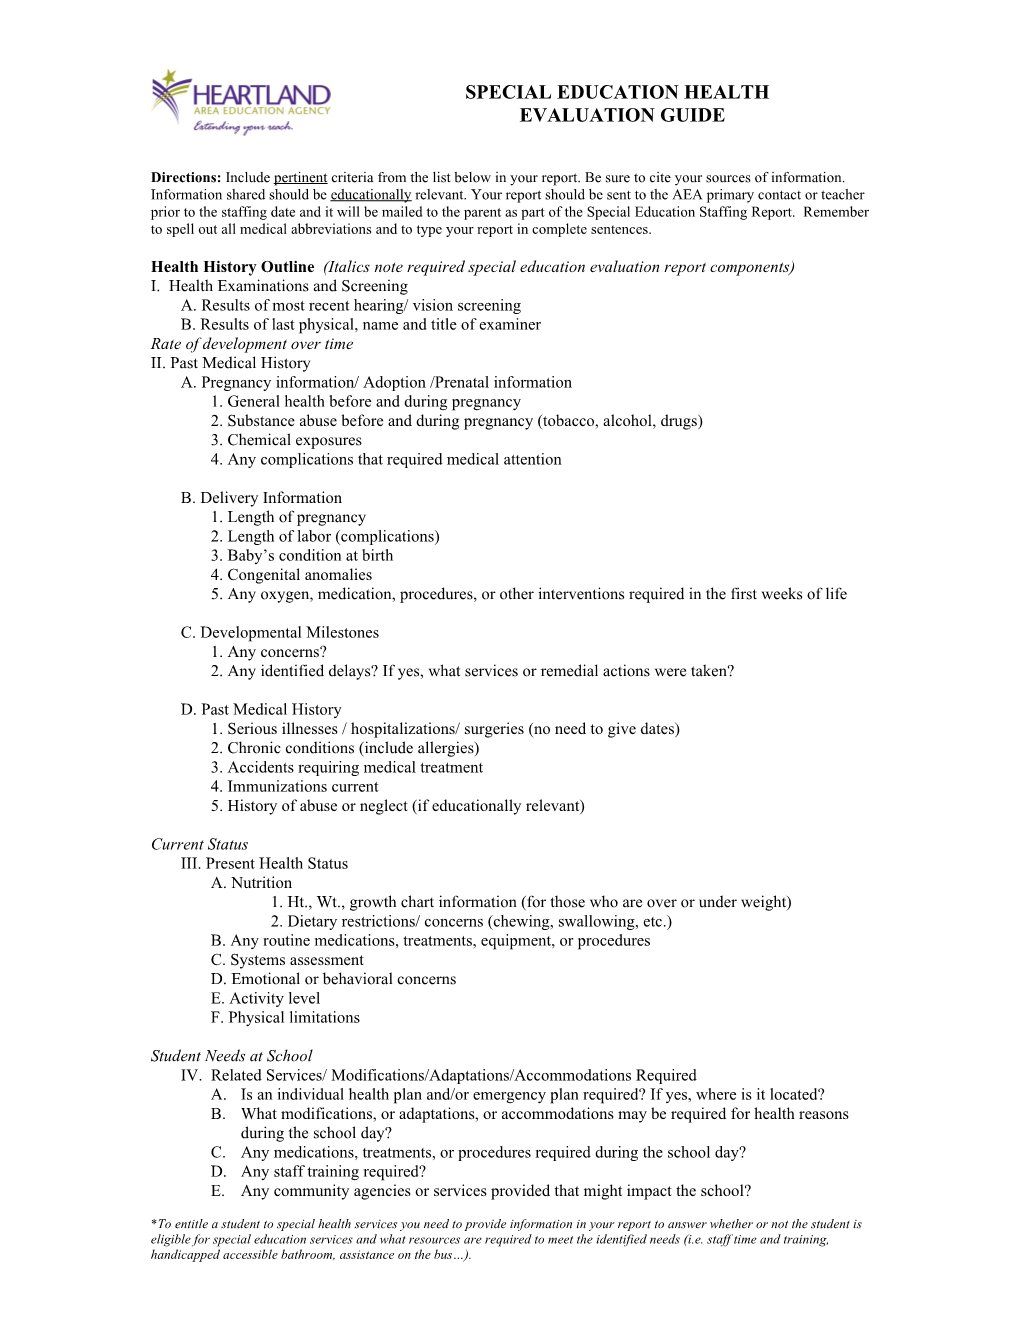 Health History Outline (Italics Note Required Special Education Evaluation Report Components)